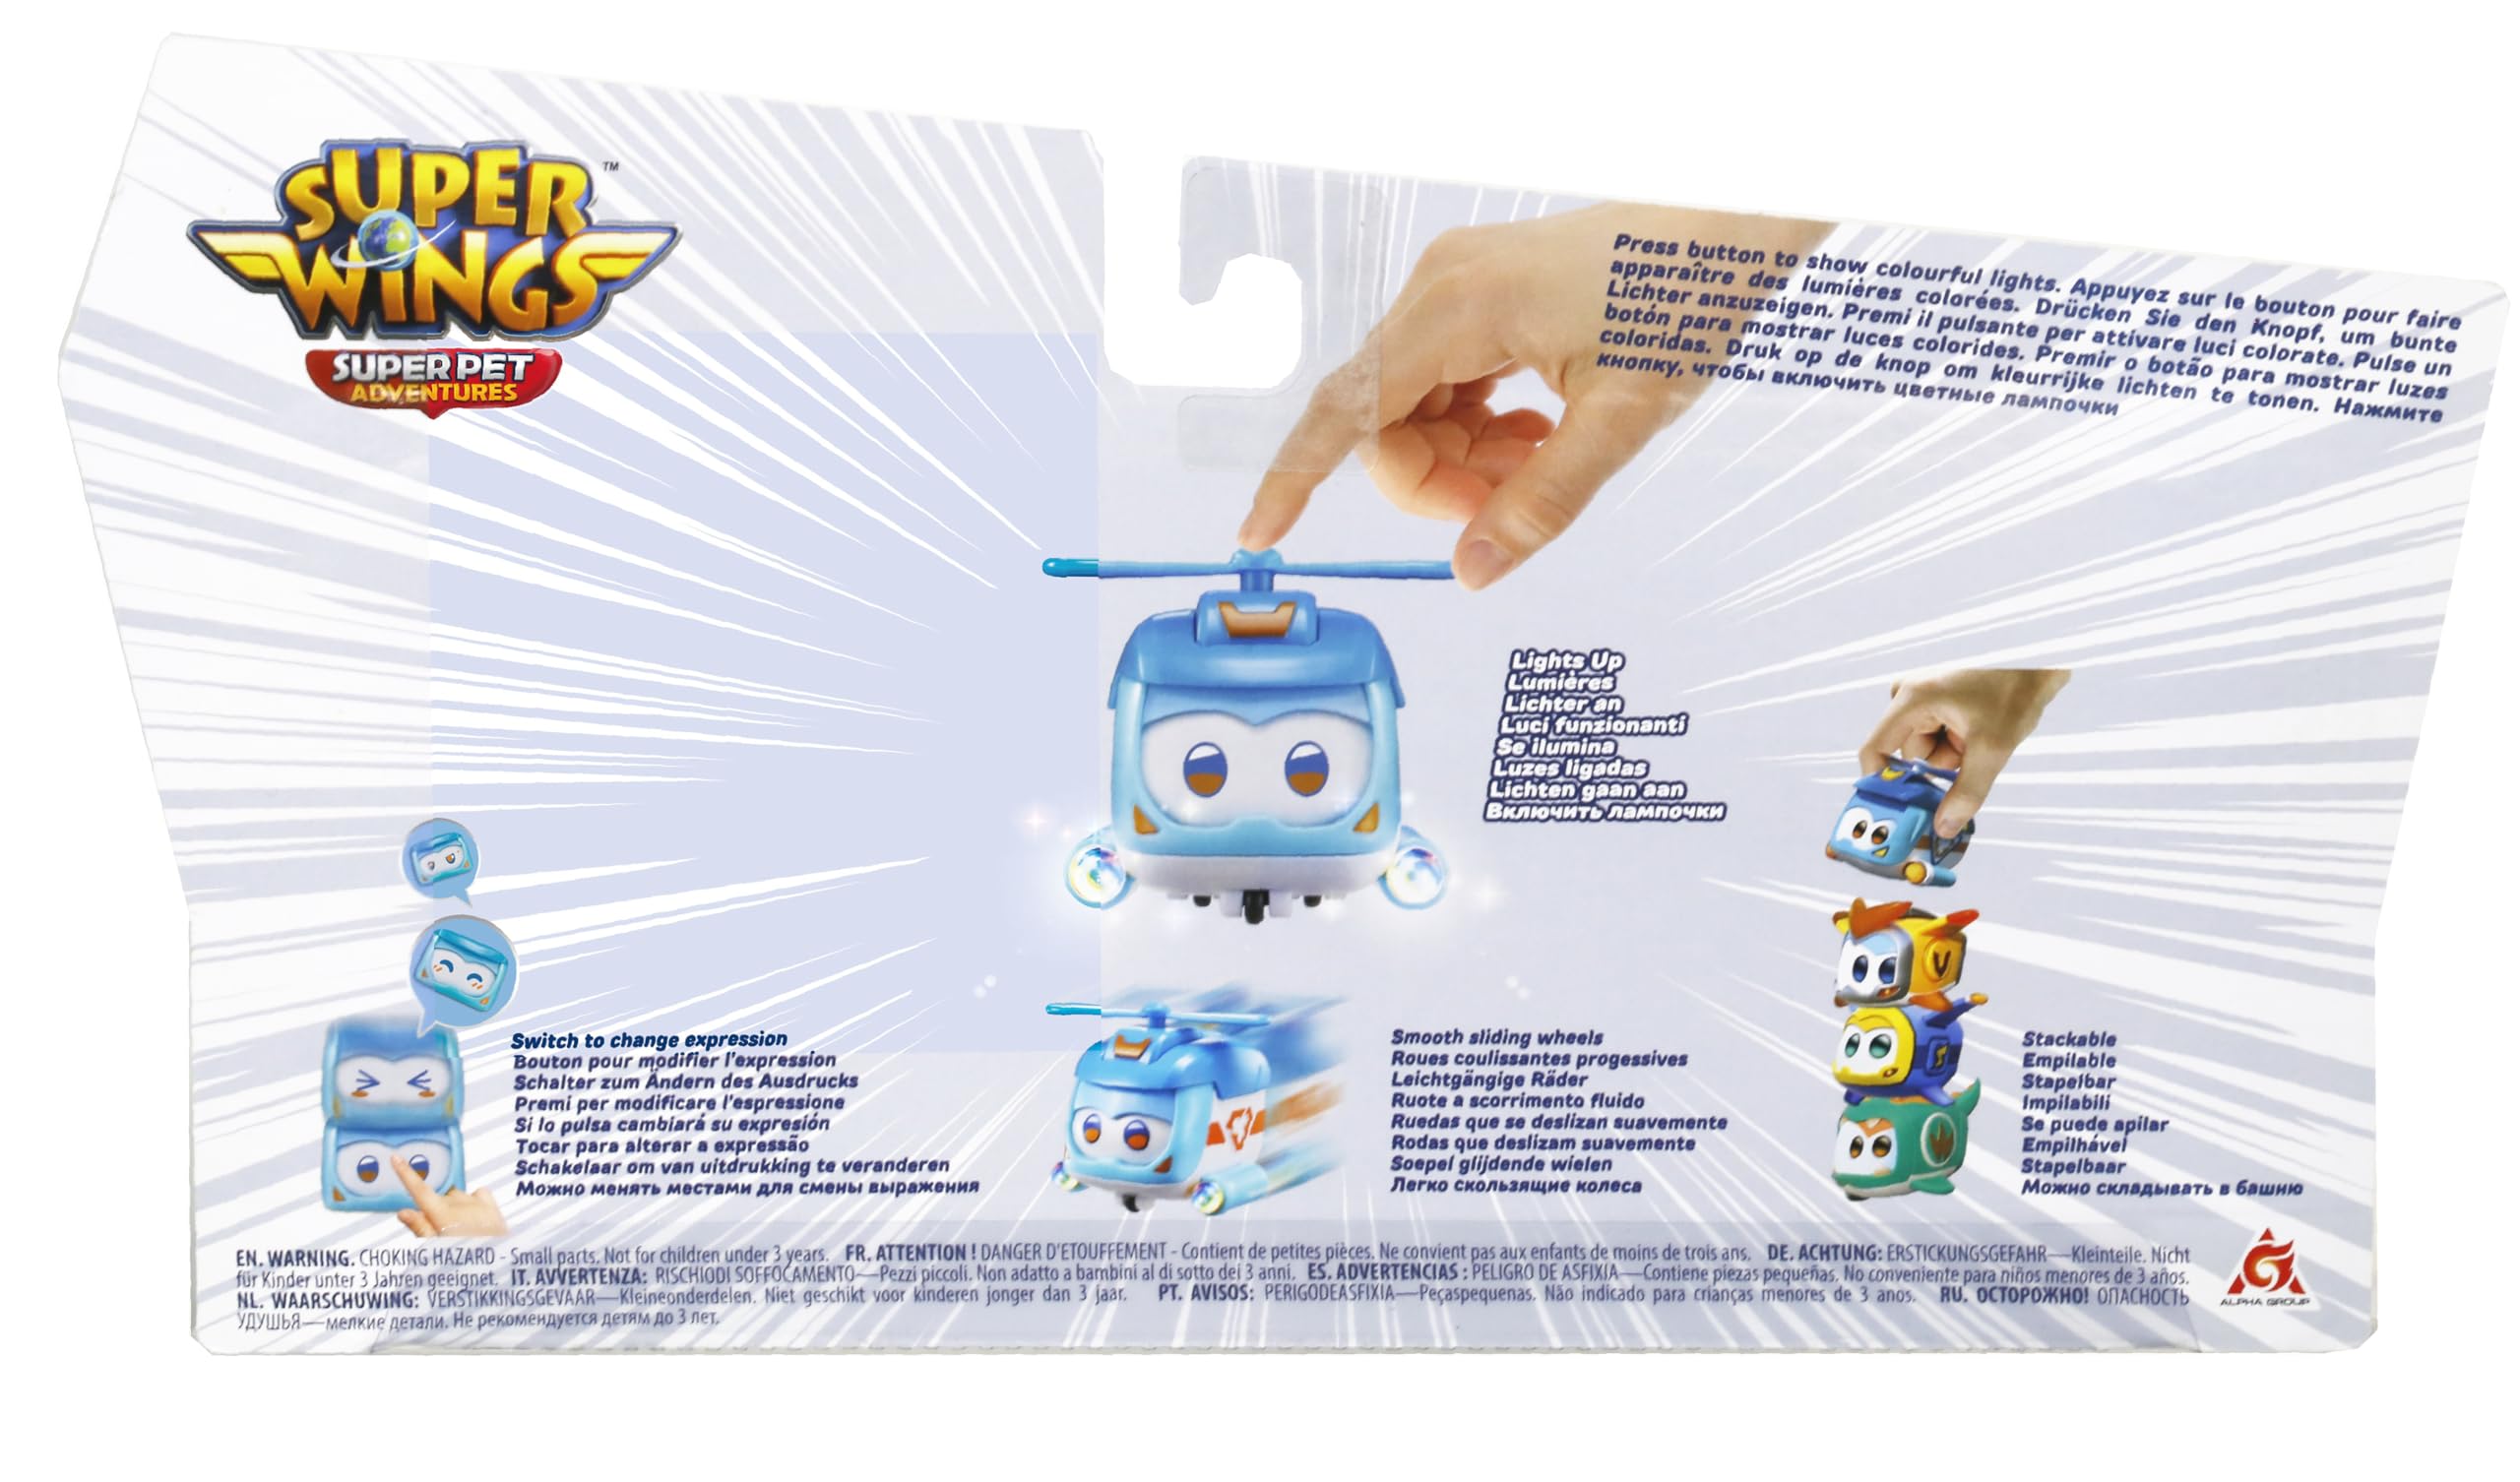 Super Wings Super Pets 4-Pack Collection Super Pets Jerome, Golden Boy, Shine, Tino, Vehicle Action Figure, with Light Effect and Switch Emotion Expressions, Gifts for Kids Aged 3 and Up